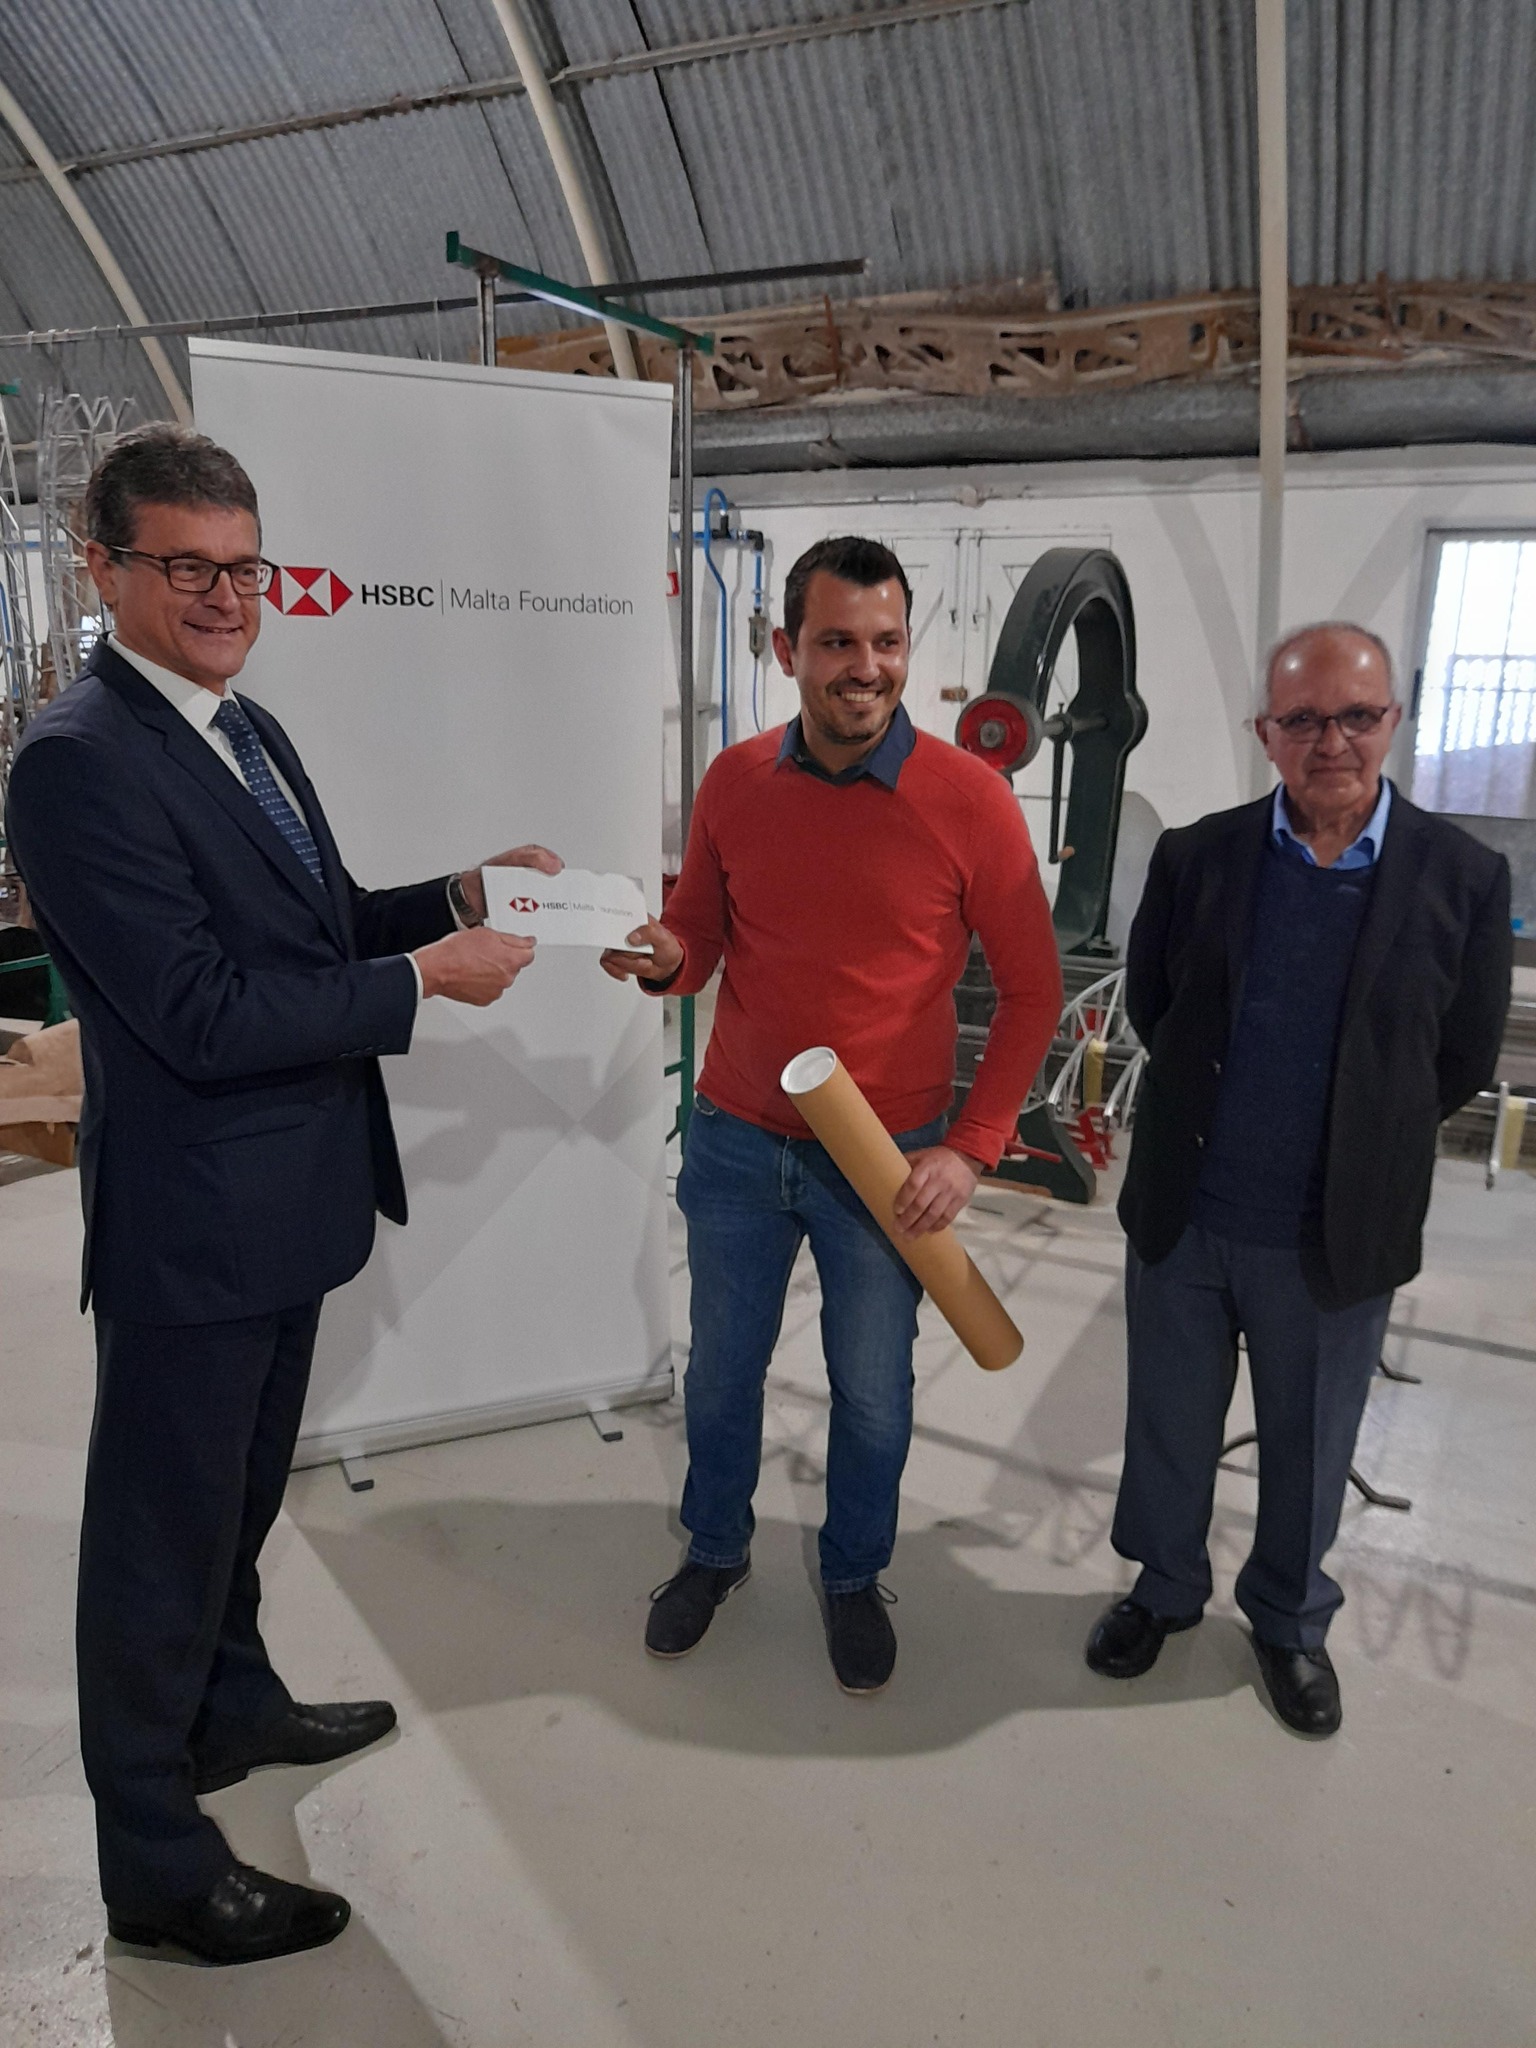 HSBC Malta Foundation supports project to bring legendary World War II aircraft back to life